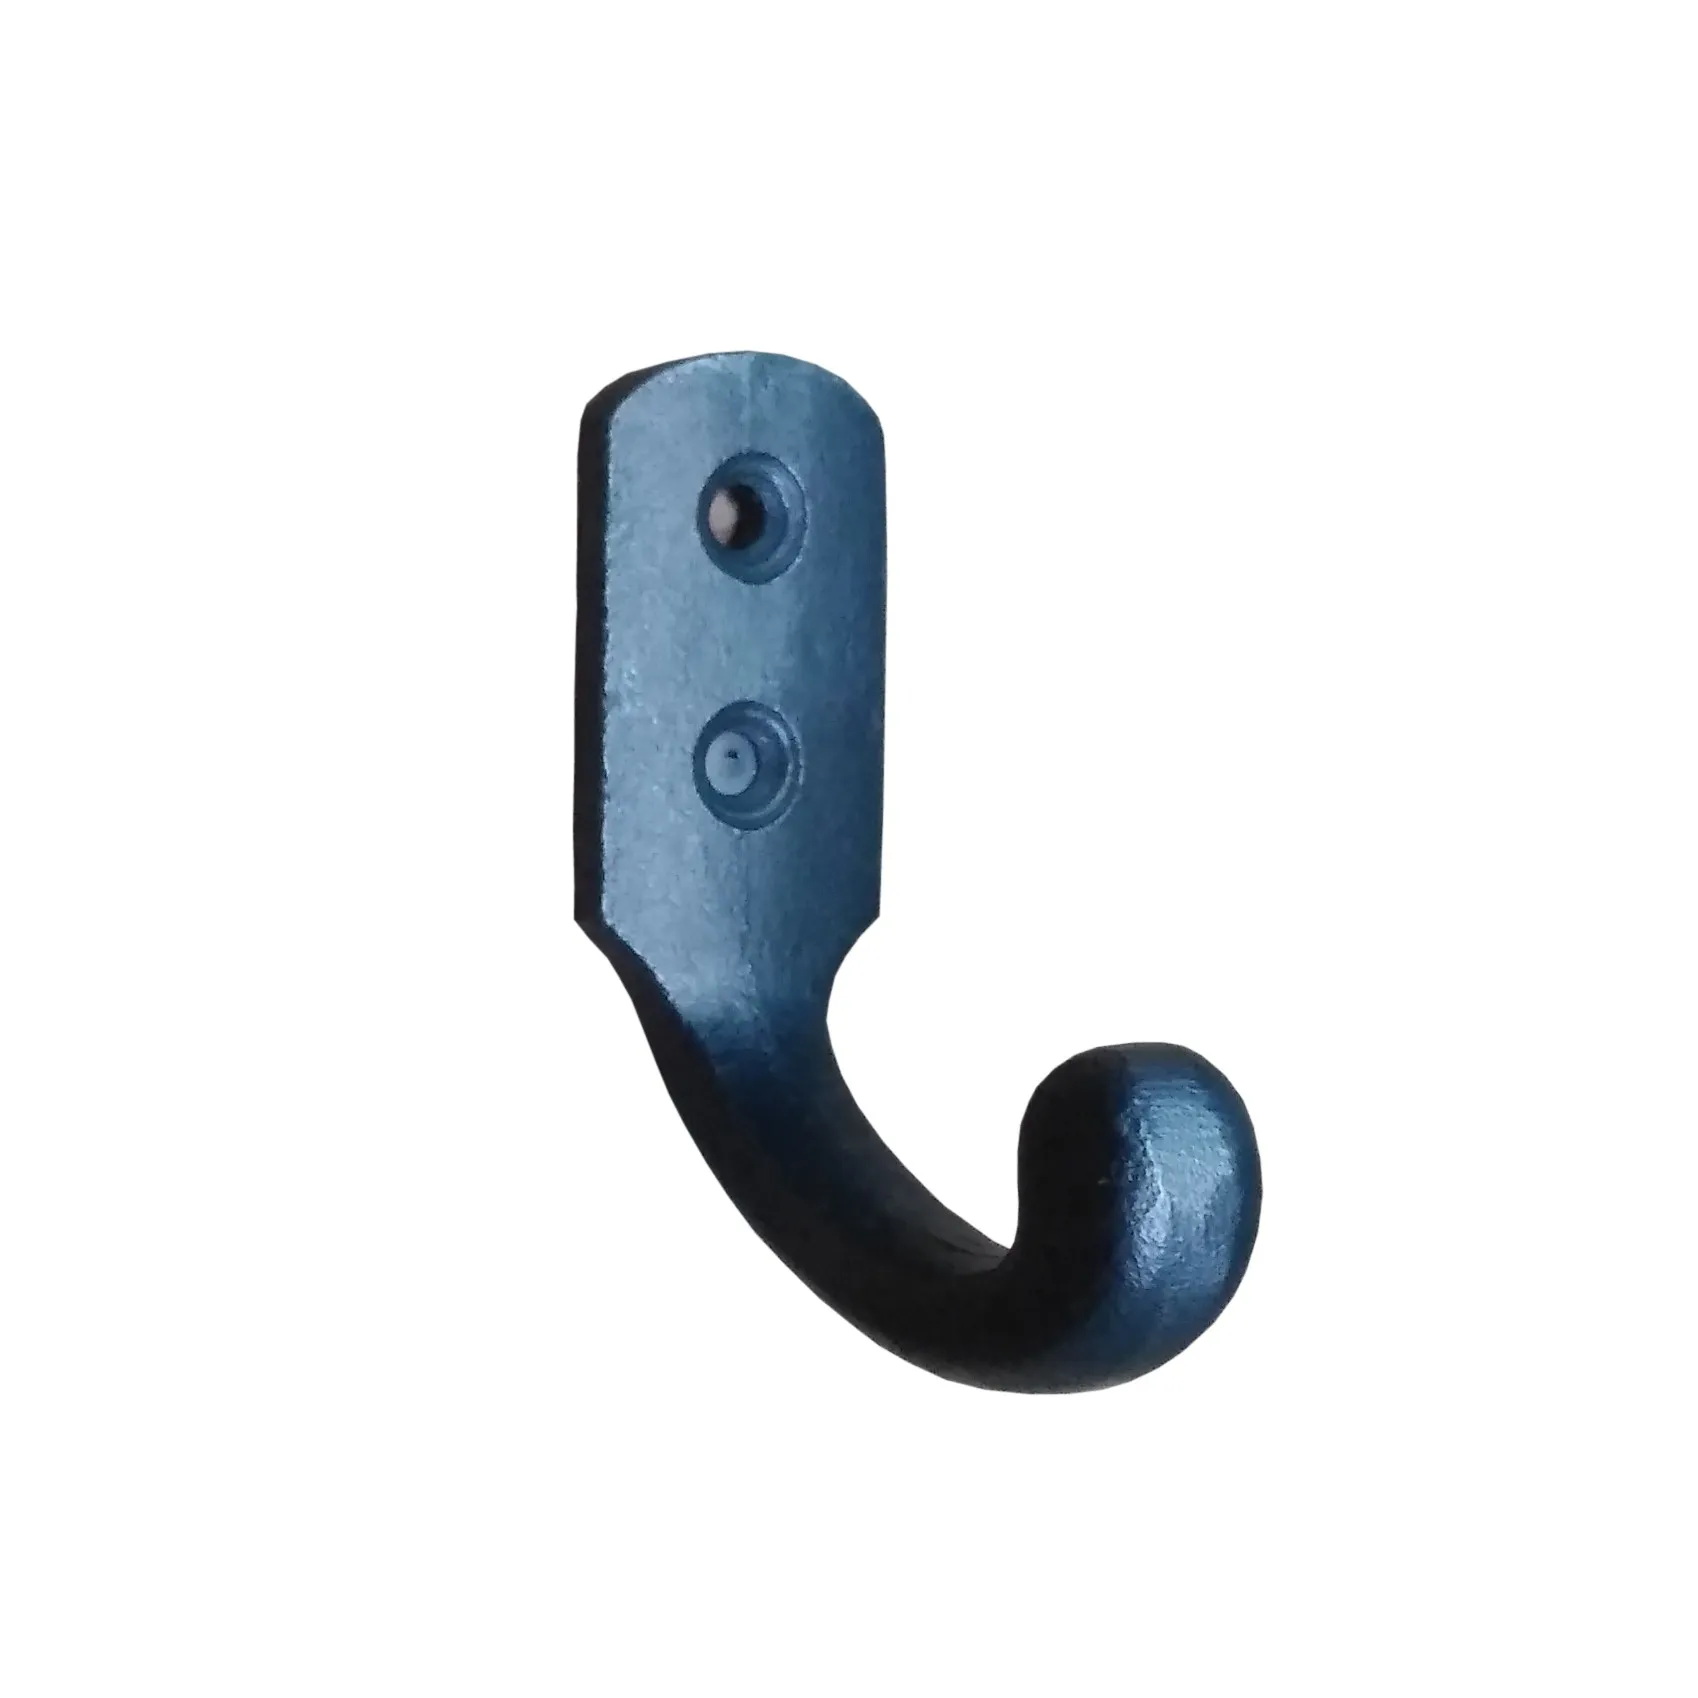 Wrought Cast Iron Coat Hook Manufacturer Supplier from Aligarh India